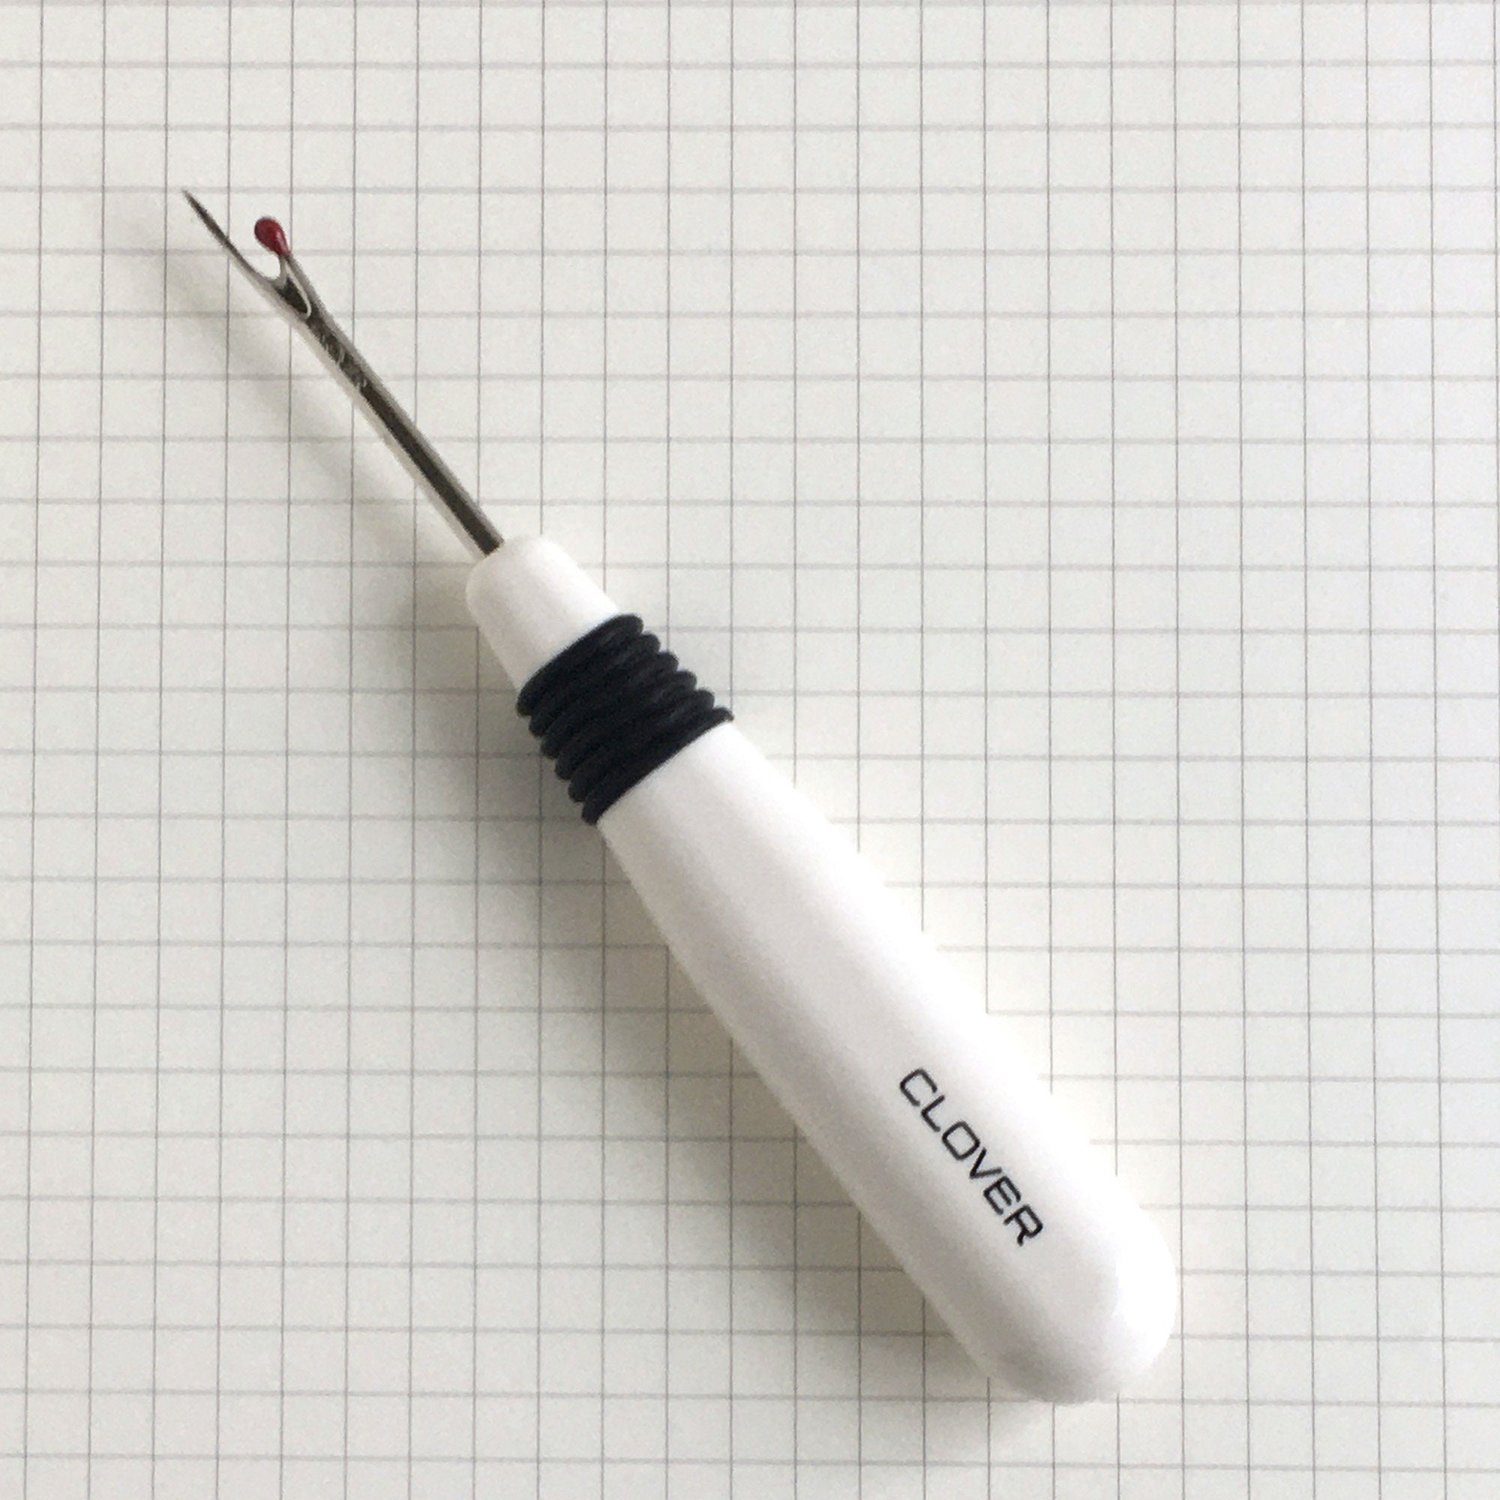 Seam Ripper Cover for the Clover Seam Ripper – Makers Want This